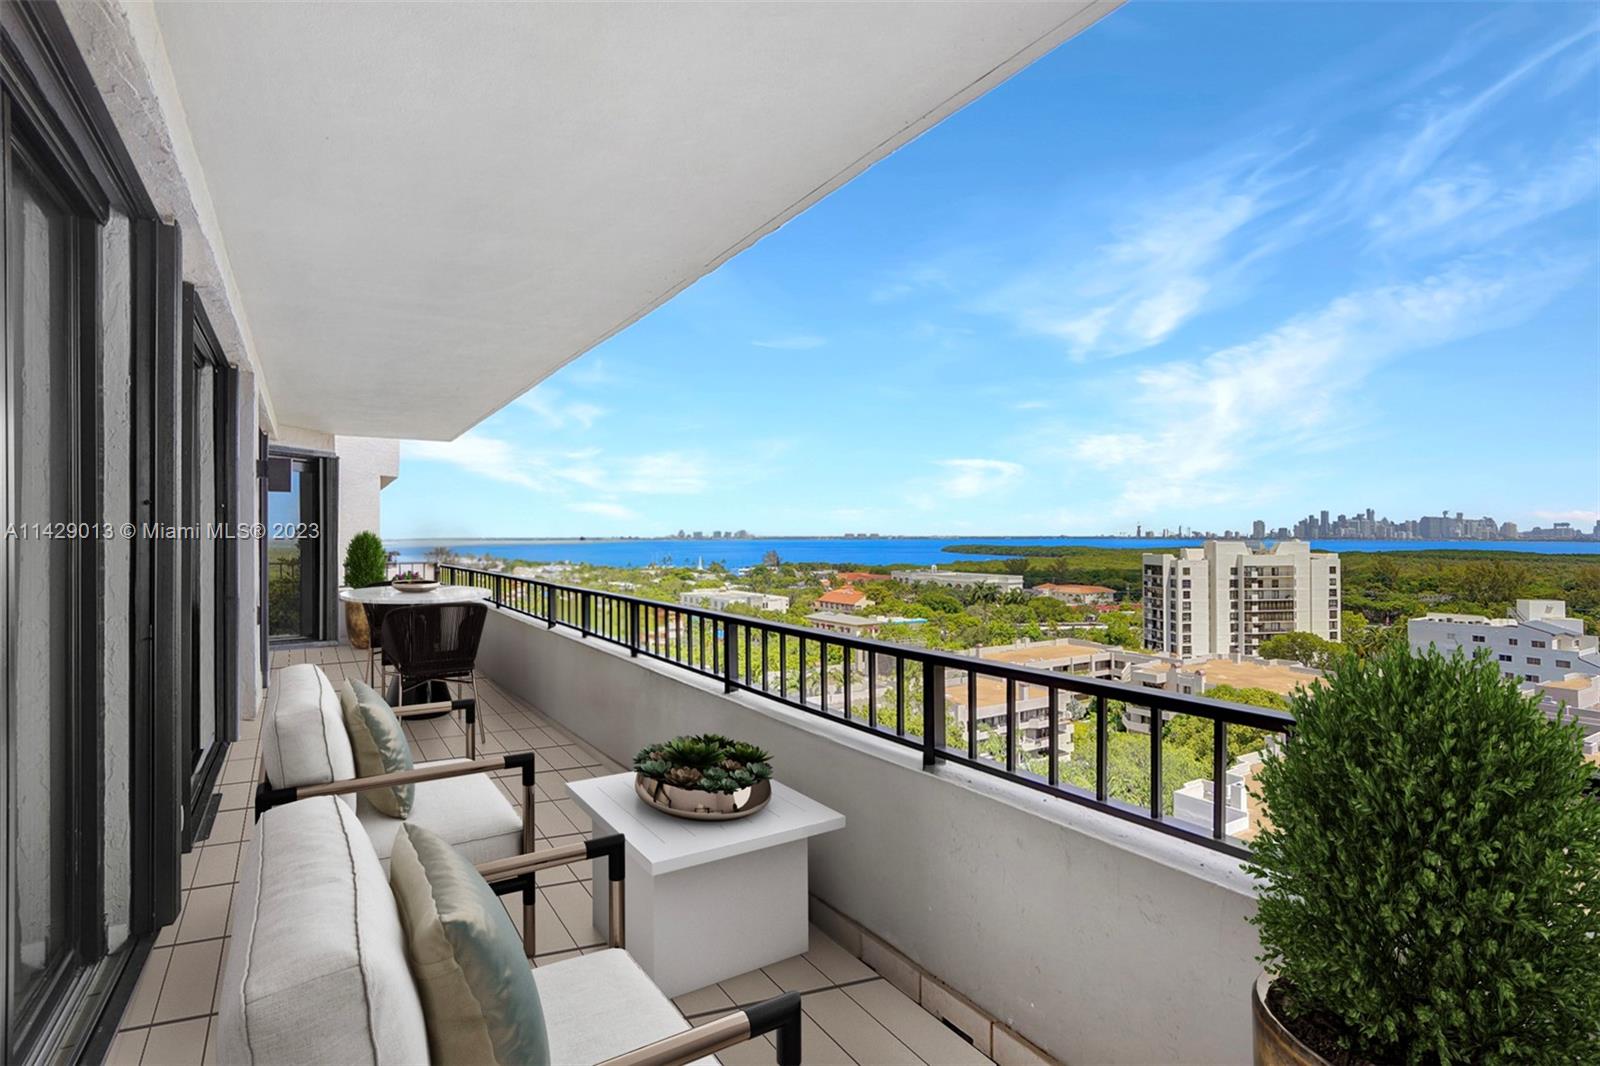 Welcome to a one-of-a-kind, rarely available Penthouse #1222 at prestigious Key Colony in Key Biscayne! Enjoy spectacular sunsets from your oversized terrace w extraordinary, unobstructed, 180 degree infinite views oF the iconic Miami skyline. Perfect for a large family w a flexible floor plan of over 3,120 sq/ft., this unique 4/3 property feels like a house &amp; is ideal for entertainment. Move right-in or modify &amp; update to make it your own. Two of the rooms can easily be reconverted back to bedrooms. Every room has water views &amp; access to the massive terrace. Plus, 3 prime parking spaces. Emerald Bay is a full-service luxury building that offers a popular Tennis Center w 12  courts. Enjoy Key Biscayne lifestyle from this oceanfront Penthouse in the sky! Some photos virtually staged.